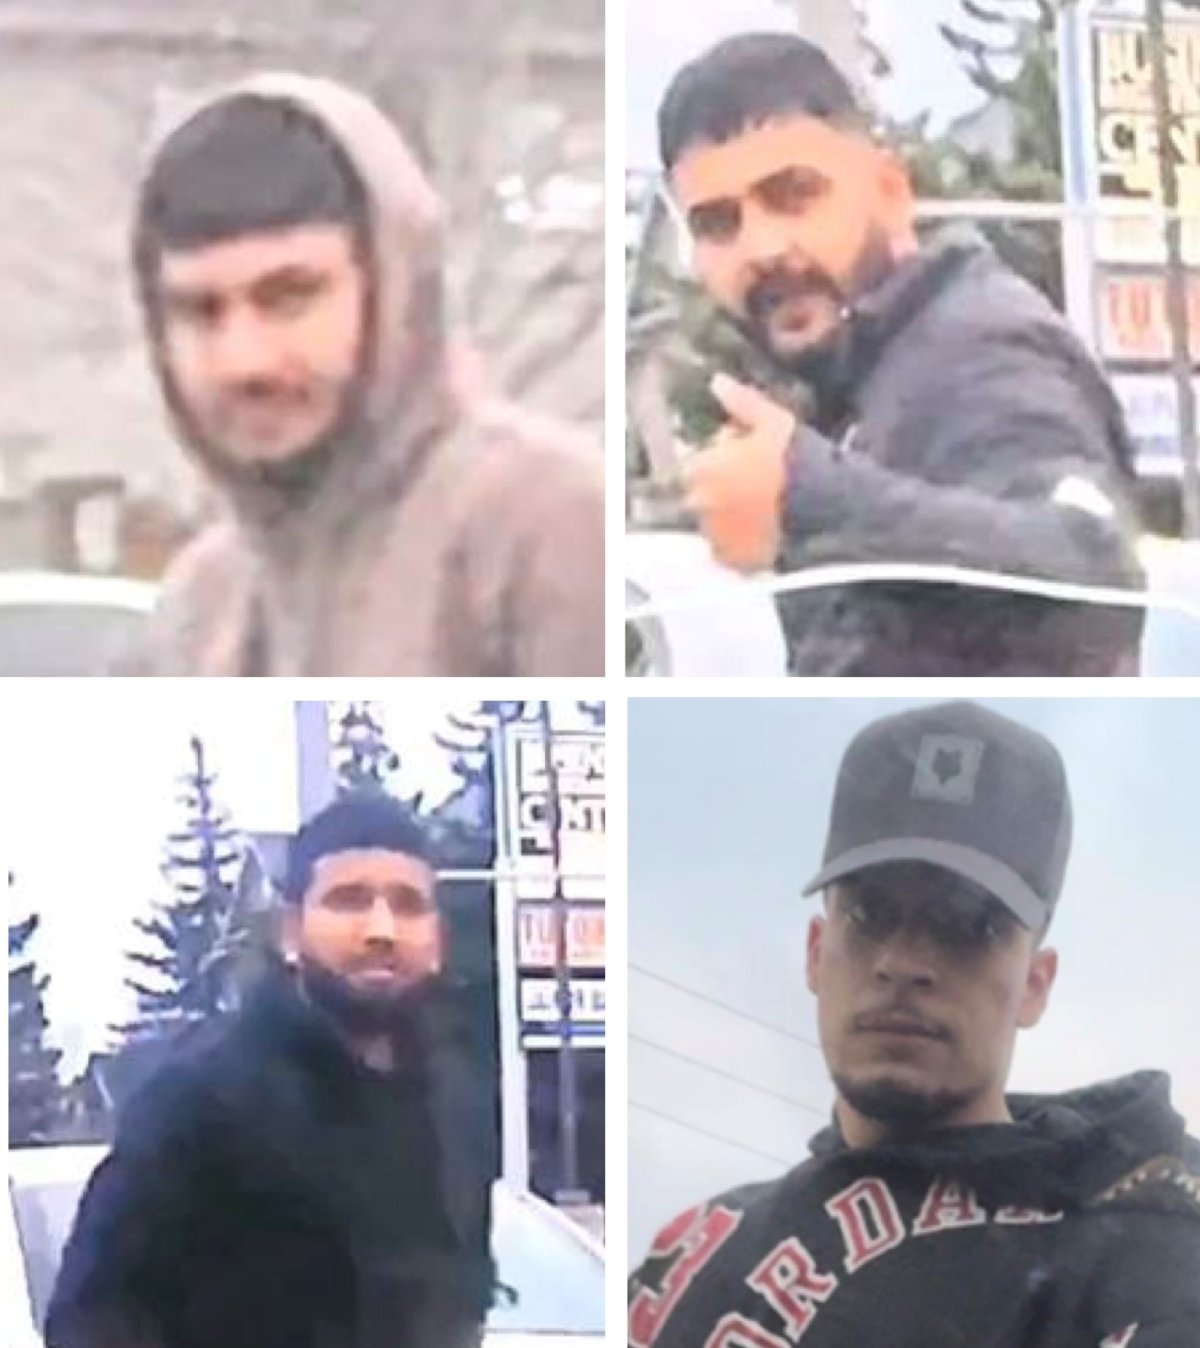 Top left: Ramanpreet Massih, as identified by police. Top Right: Akashdeep Singh, as per police. Bottom: Two unidentified suspects.